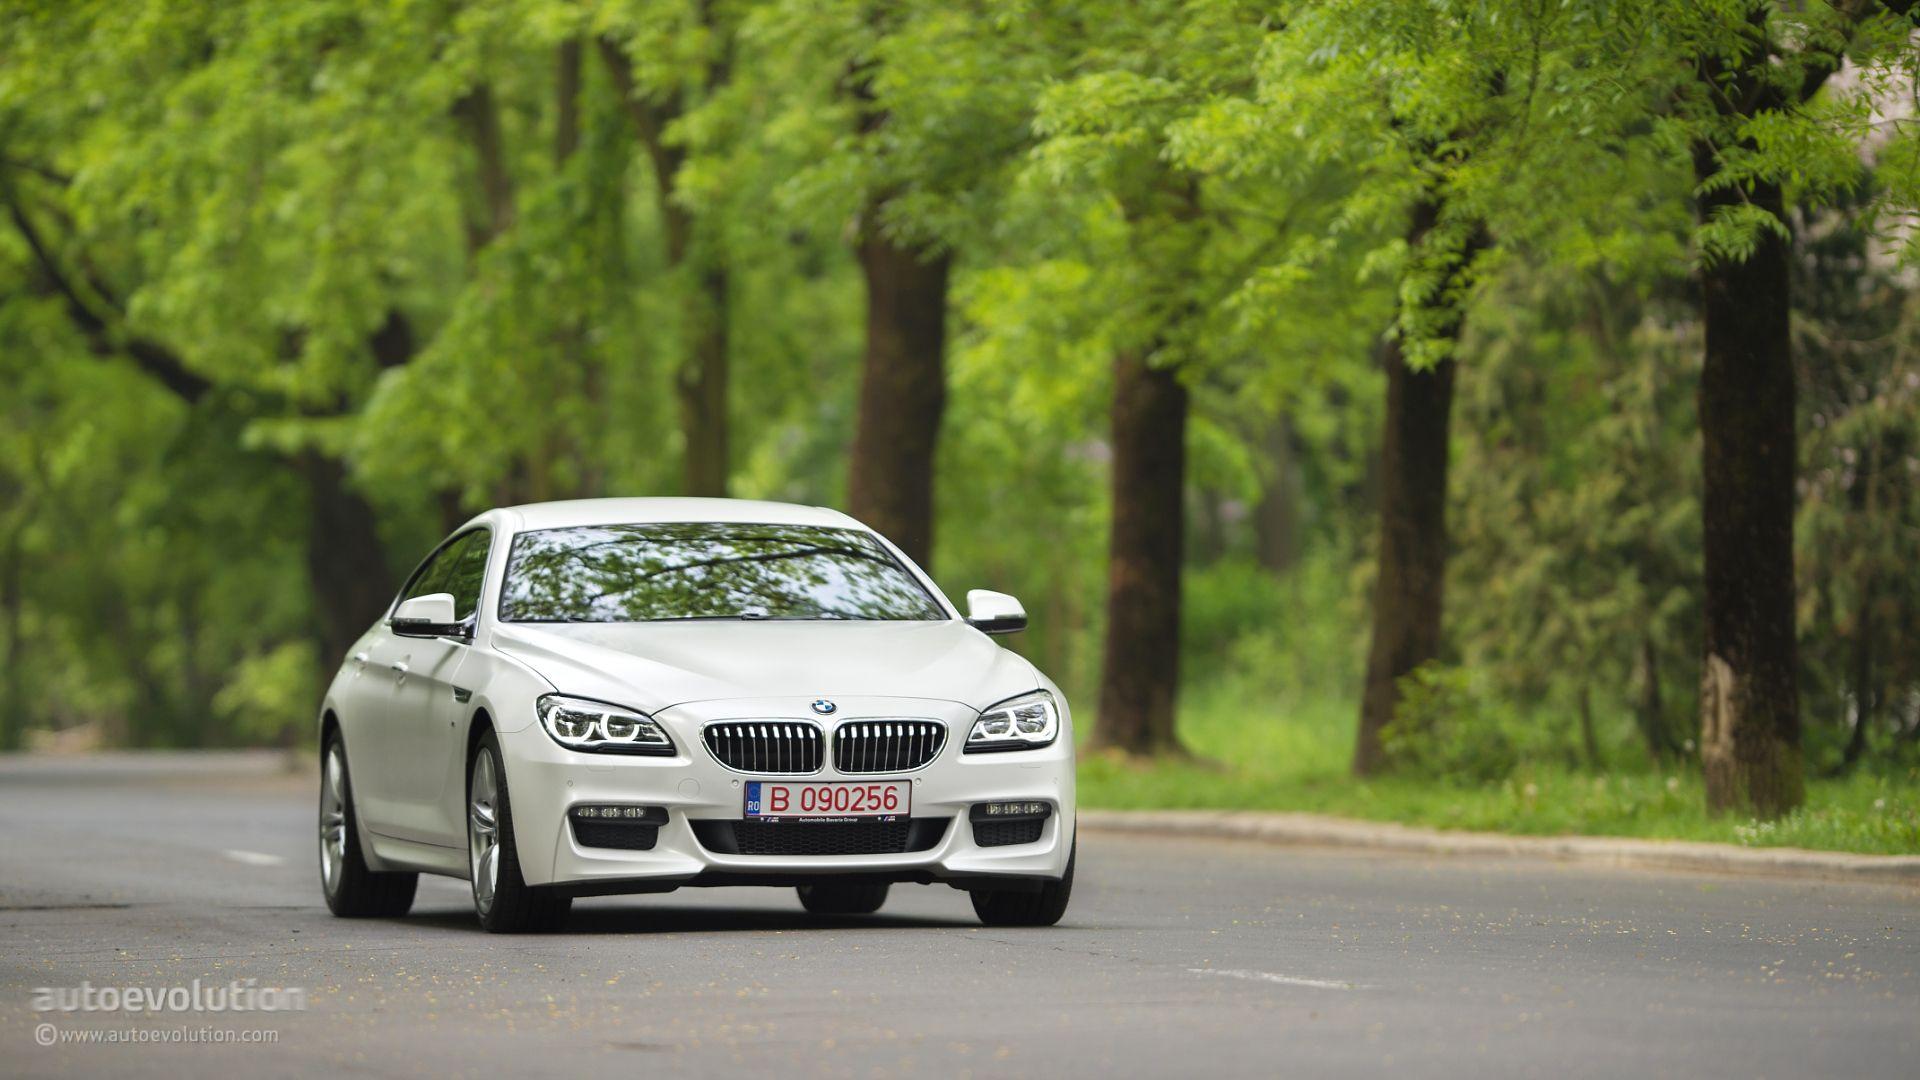 BMW 6 Series Gran Coupe Wallpaper: Bring on the Frozen Paint